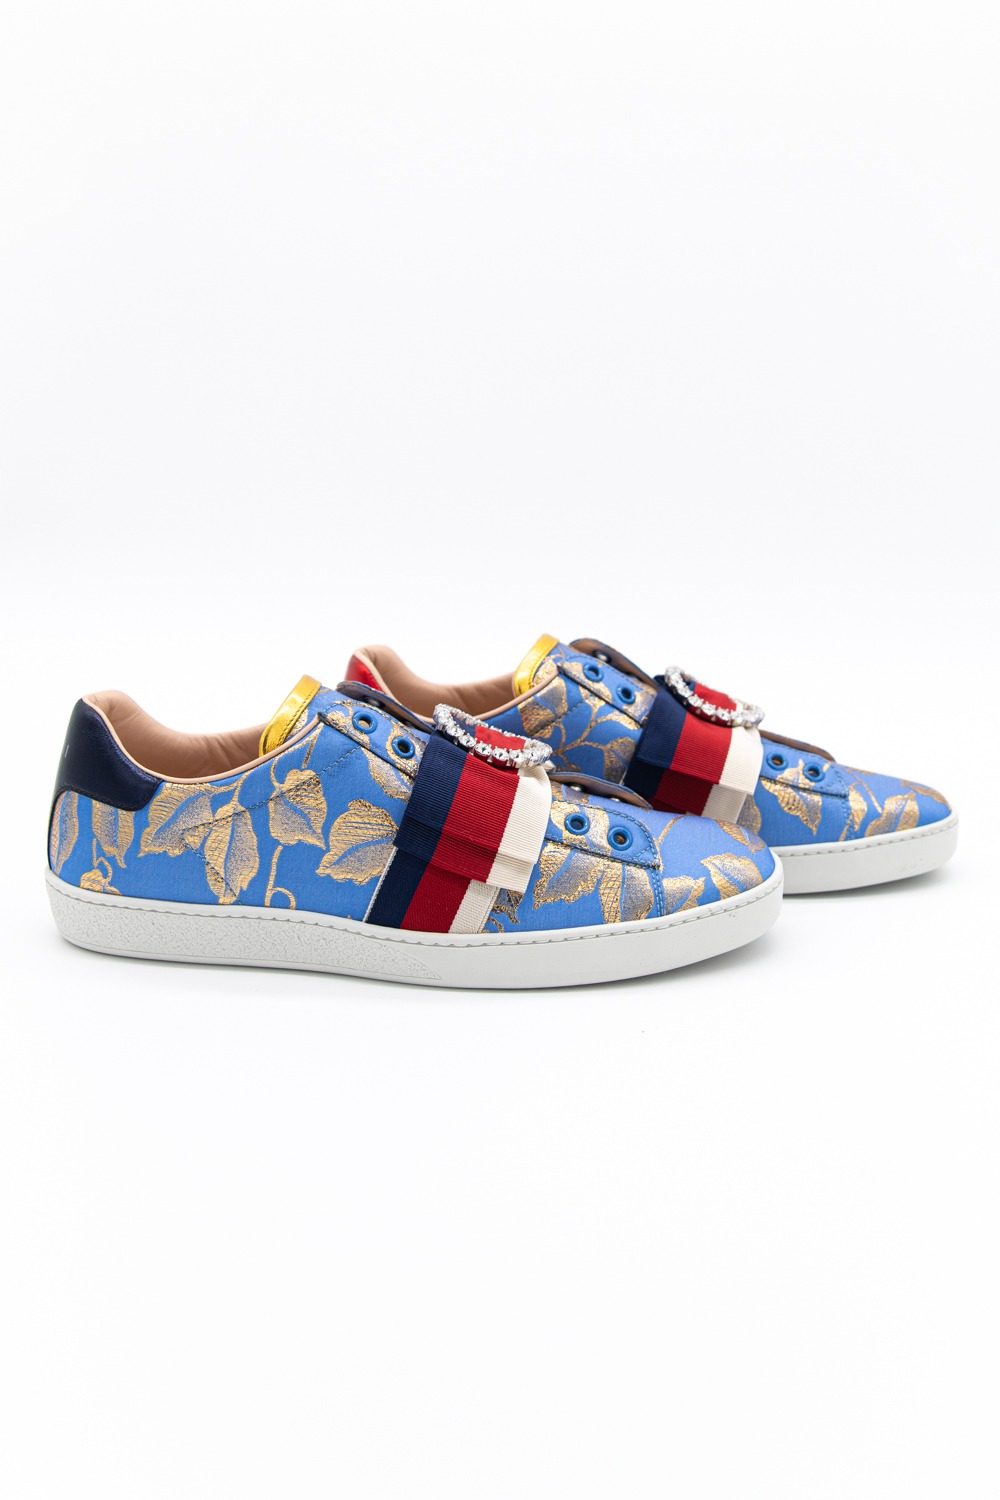 Thumbnail of http://Gucci%20Sneaker%20in%20Blau%20und%20Gold